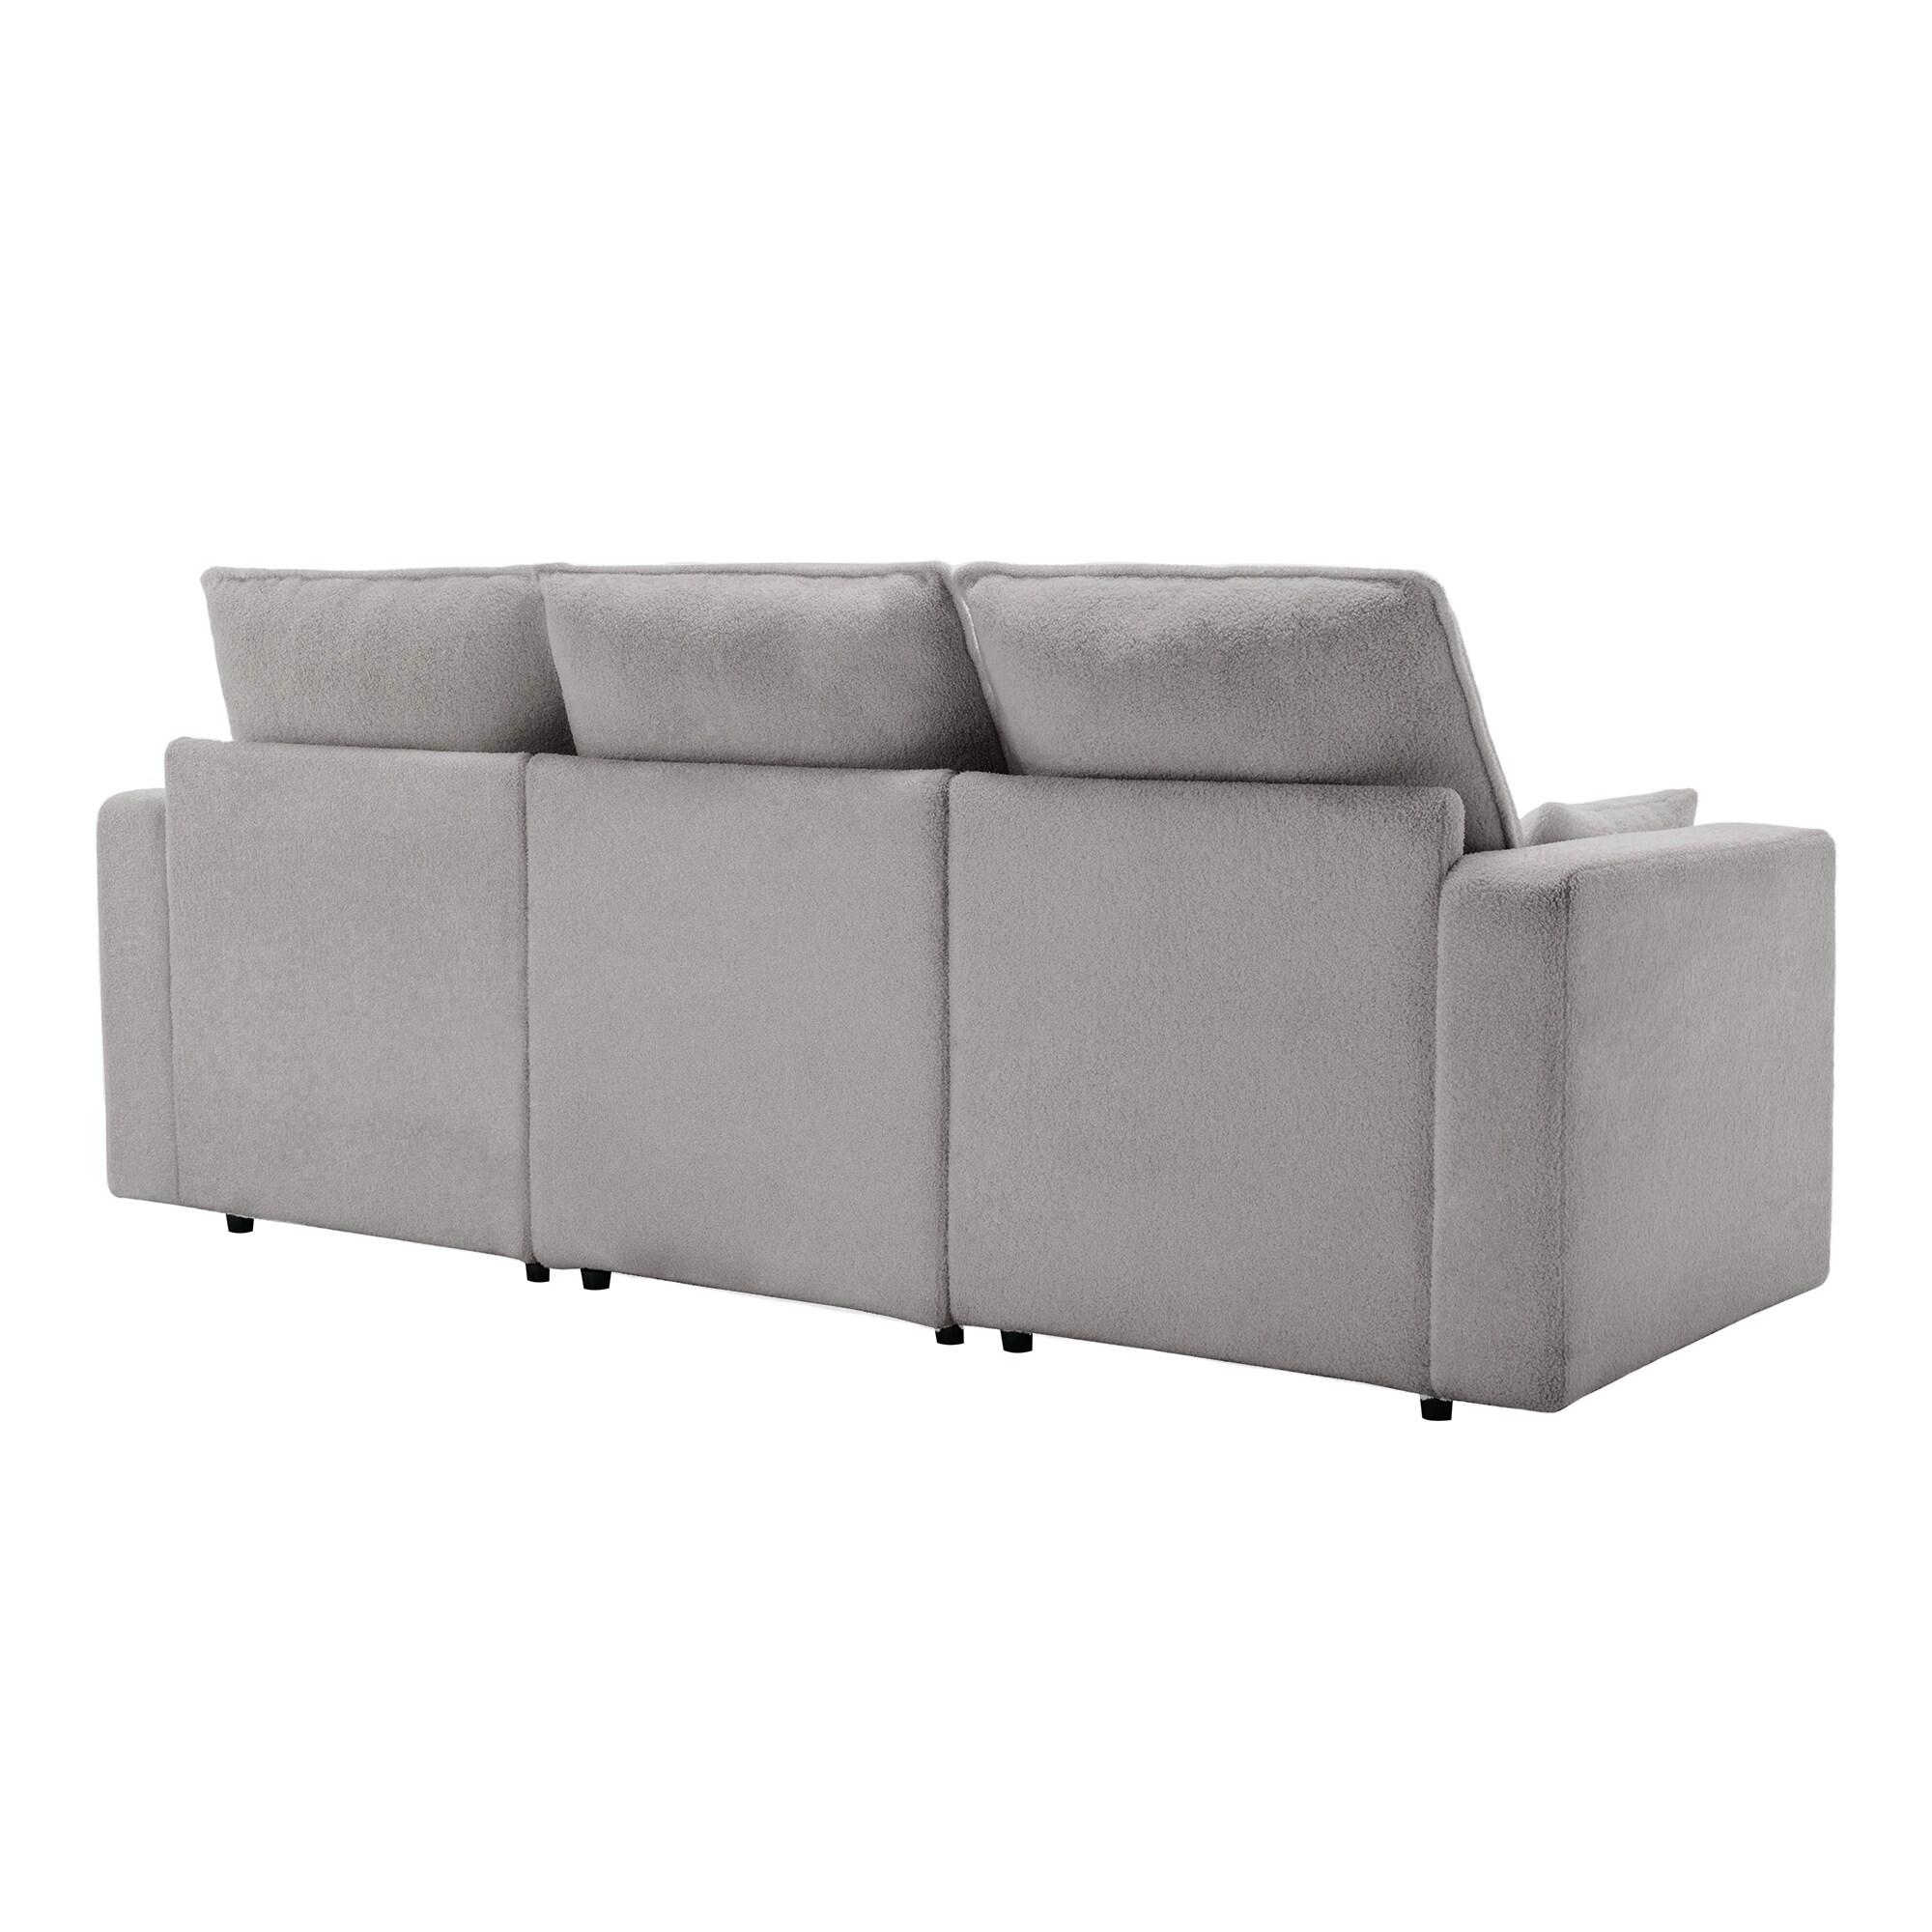 https://ak1.ostkcdn.com/images/products/is/images/direct/6737ffc7e4020aa2048196a44931d1219964cdcc/Loveseat-with-Removable-Back-and-Seat-Cushions-Teddy-Fabric-Sofa-Couch-with-2-Pillows-for-Living-Room-Office-Apartment.jpg